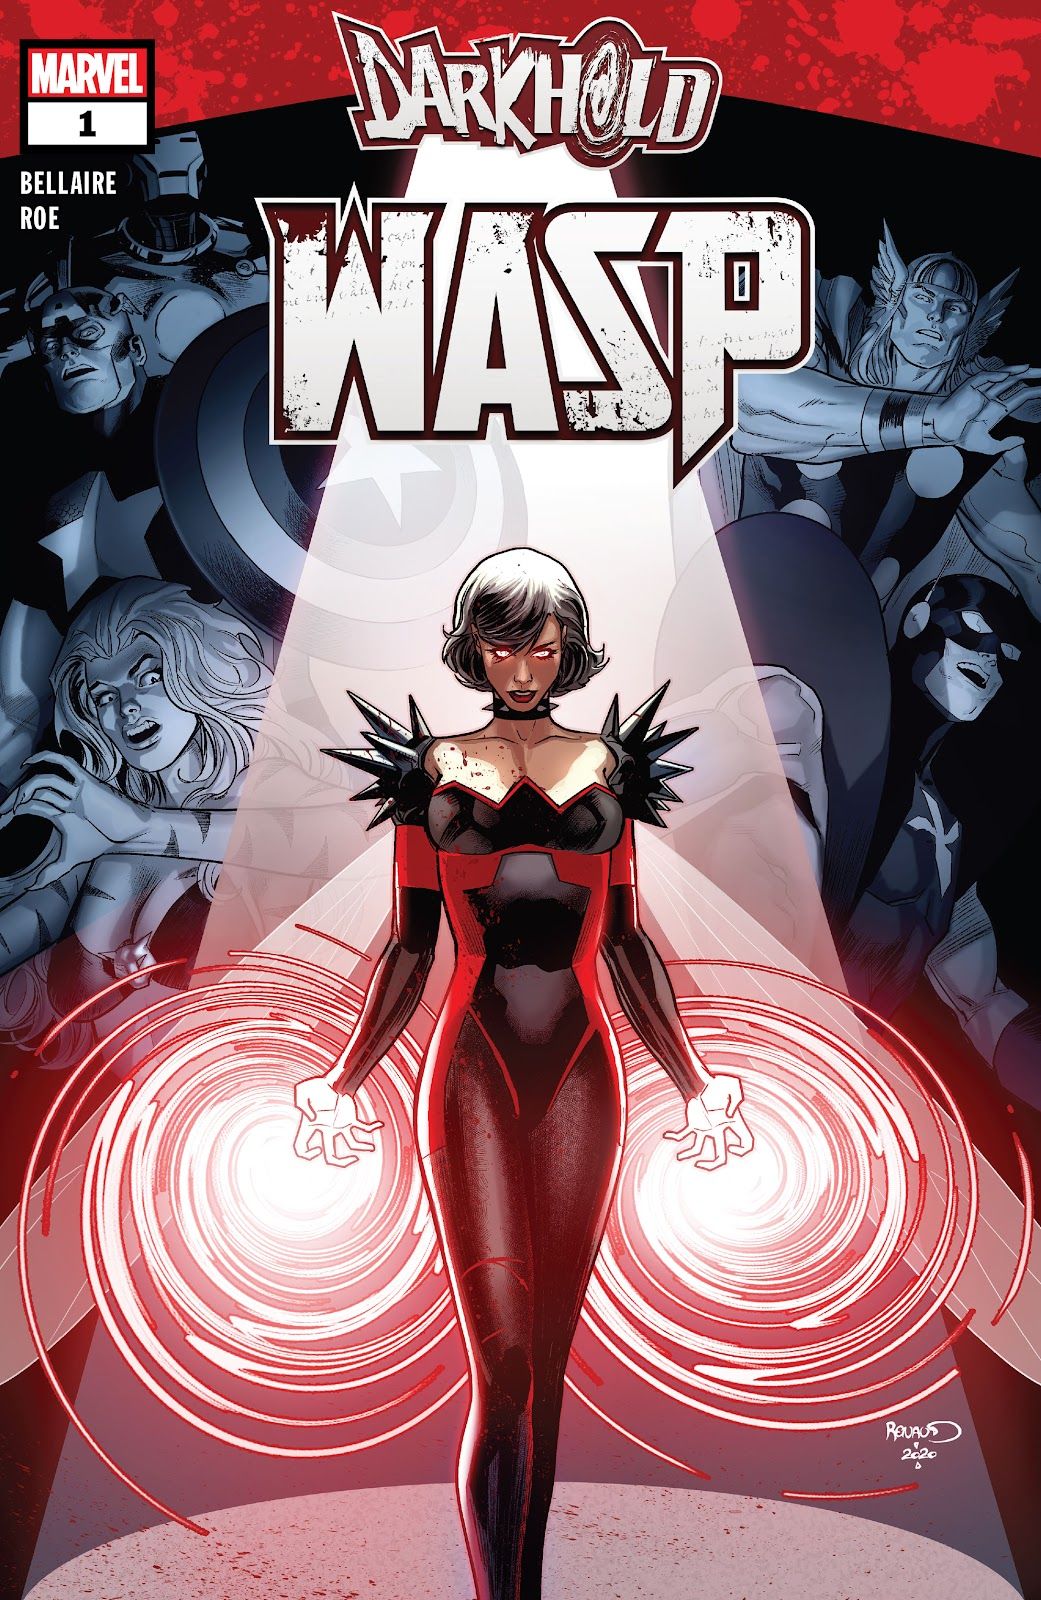 Avengers Hero's Marriage Is Over in Marvel's Darkhold: Wasp - Review